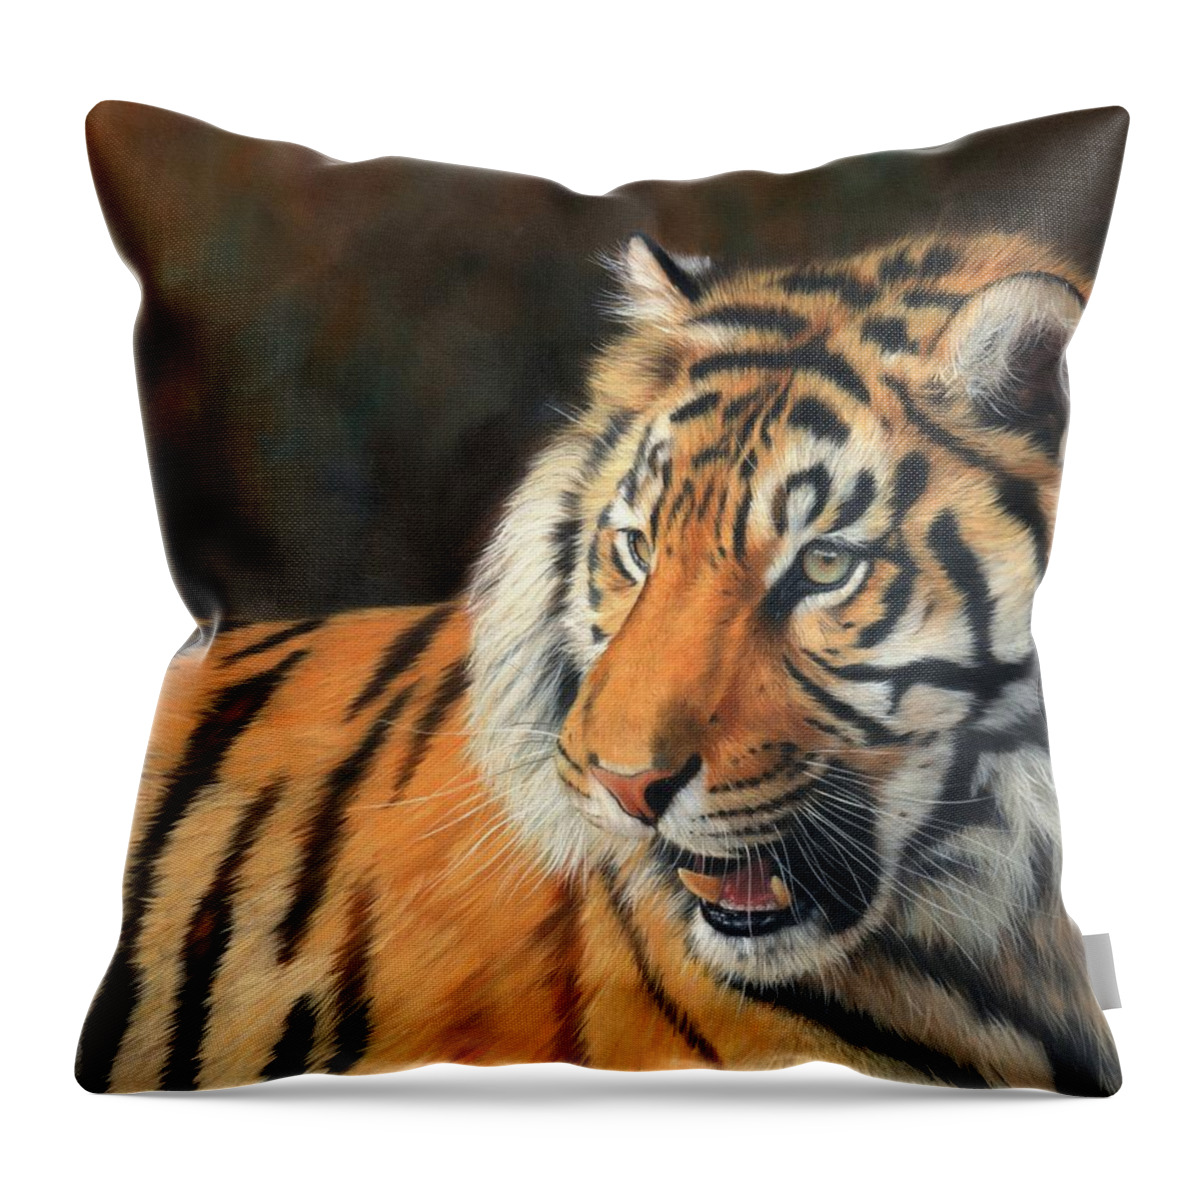 Tiger Throw Pillow featuring the painting Amur Tiger #4 by David Stribbling